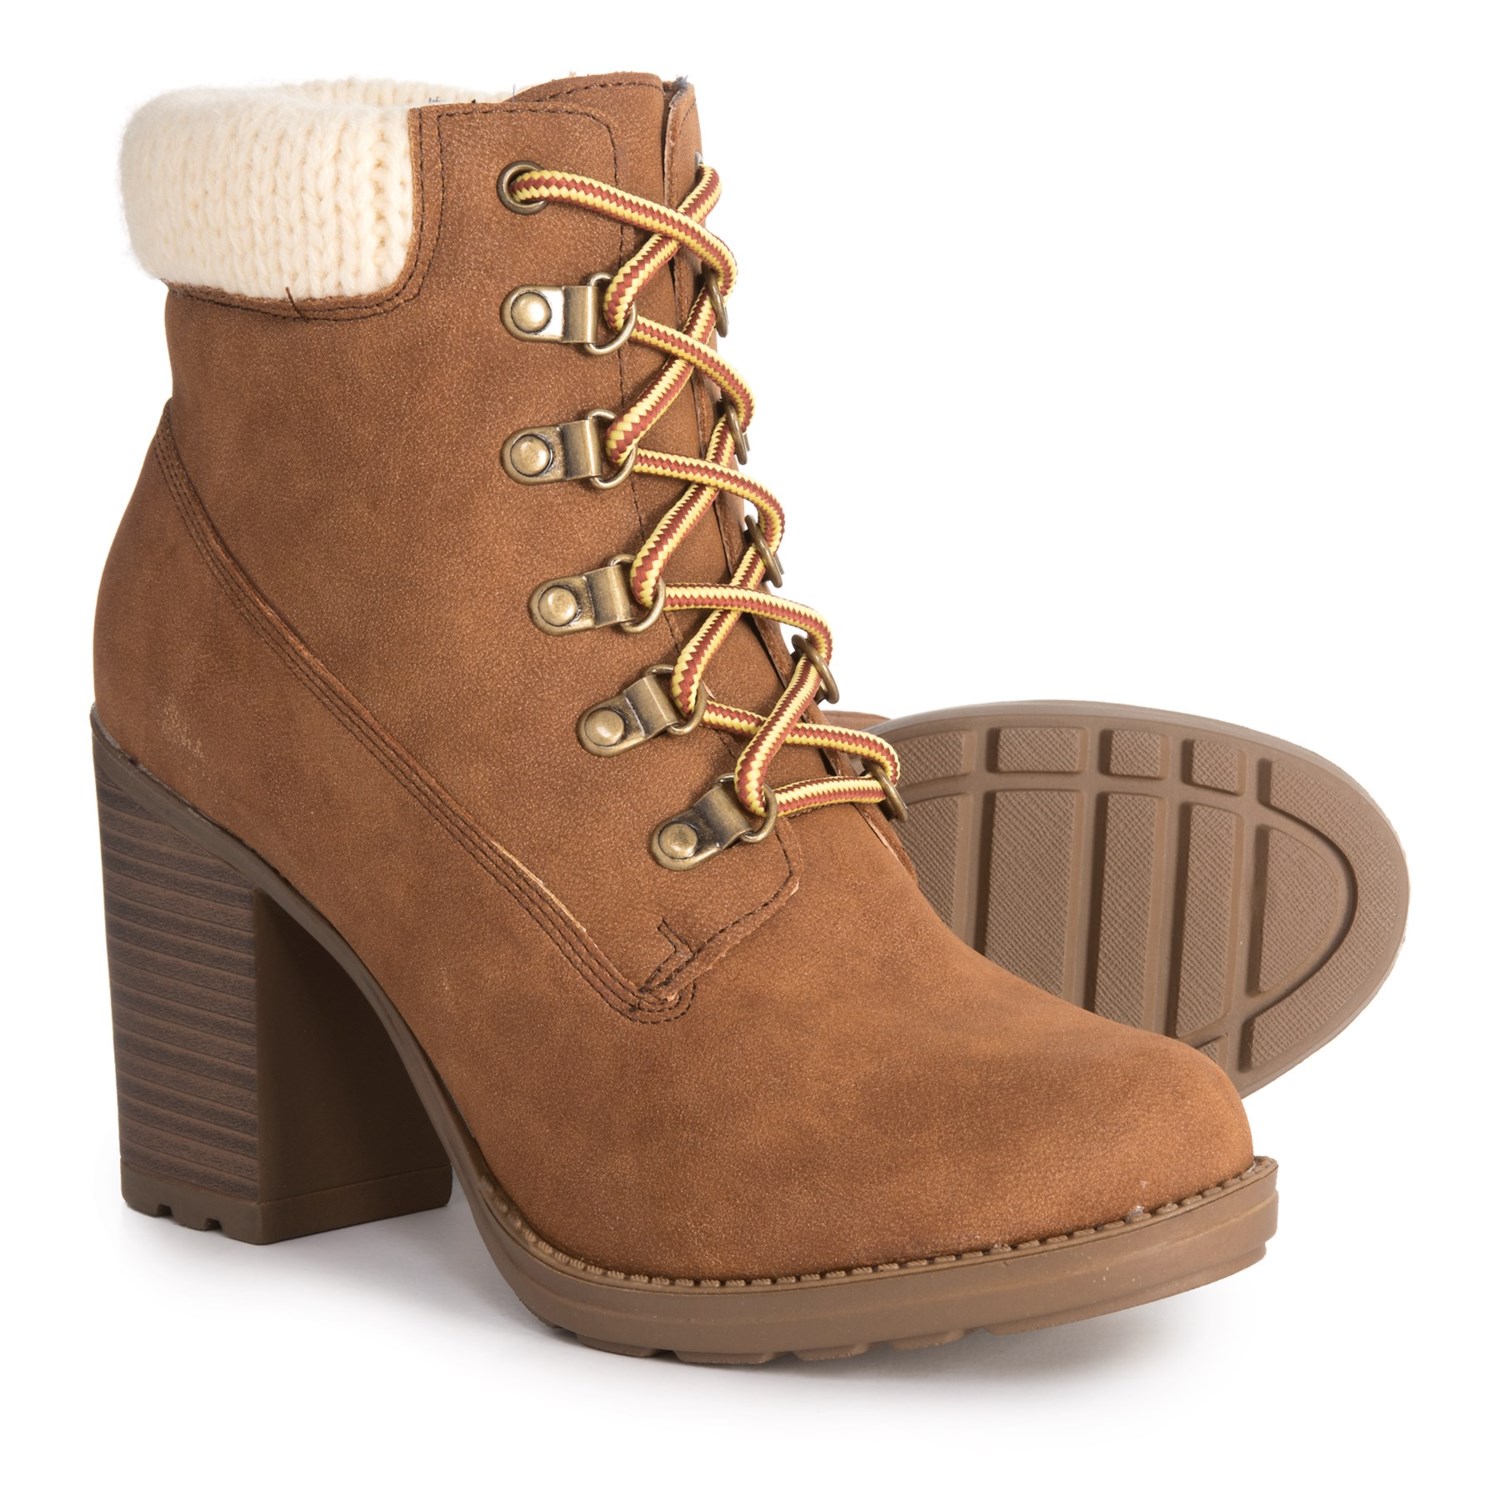 ESPRIT Hero Ankle Boots (For Women) - Save 56%